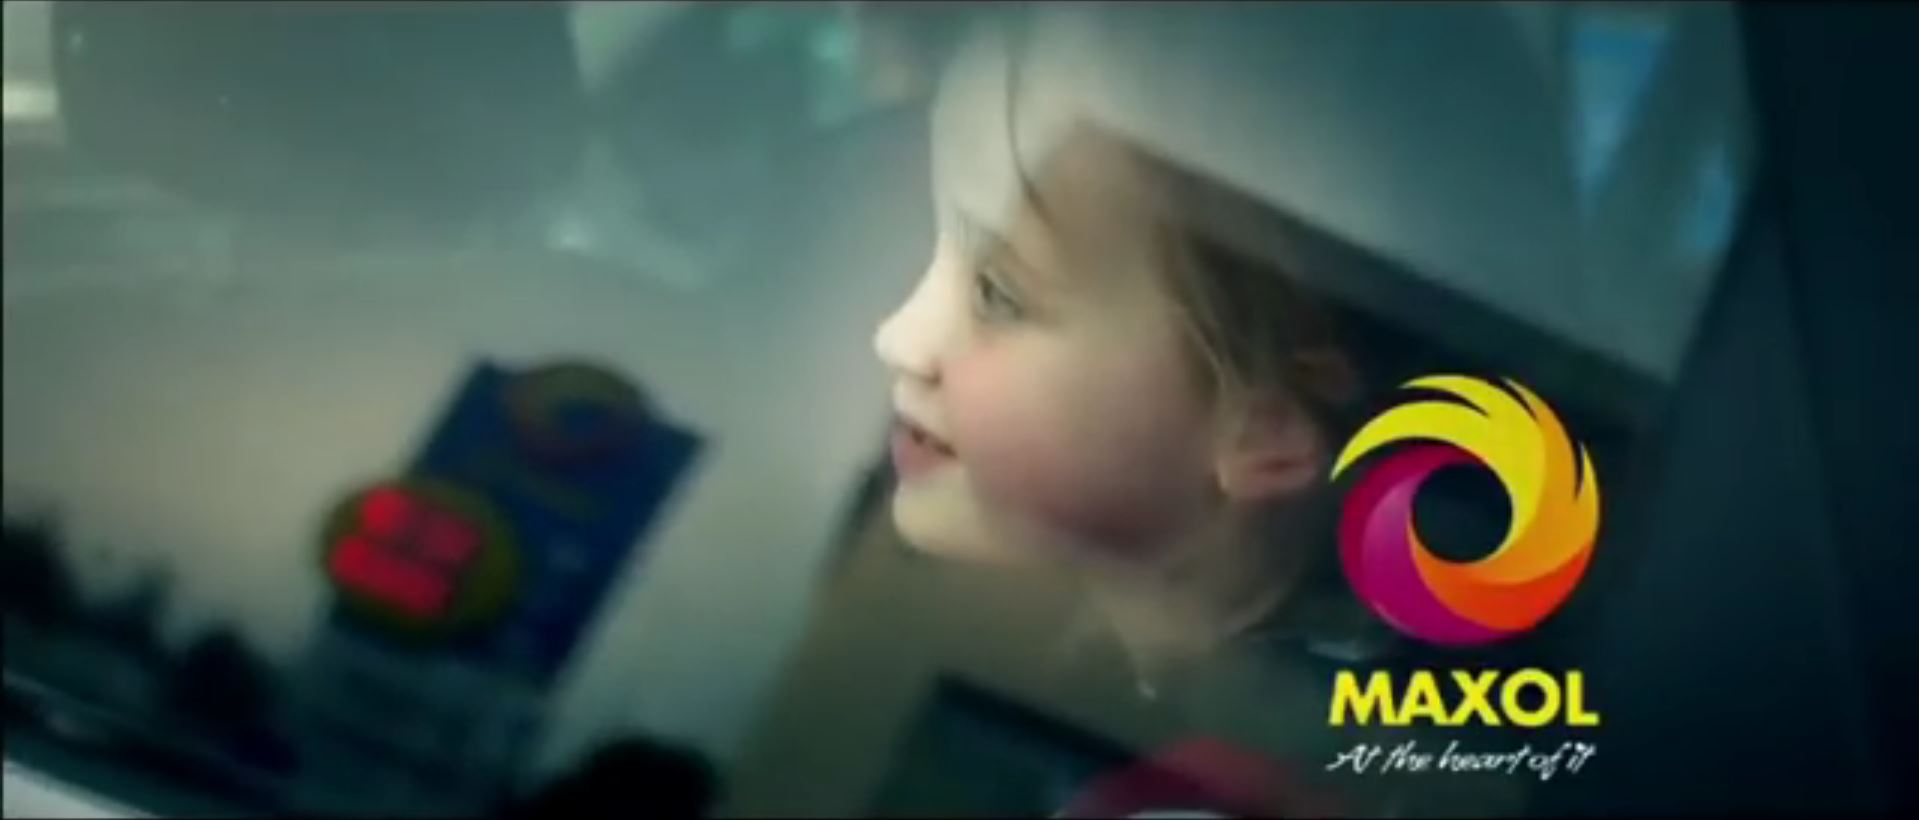 Maxol launches national TV ad